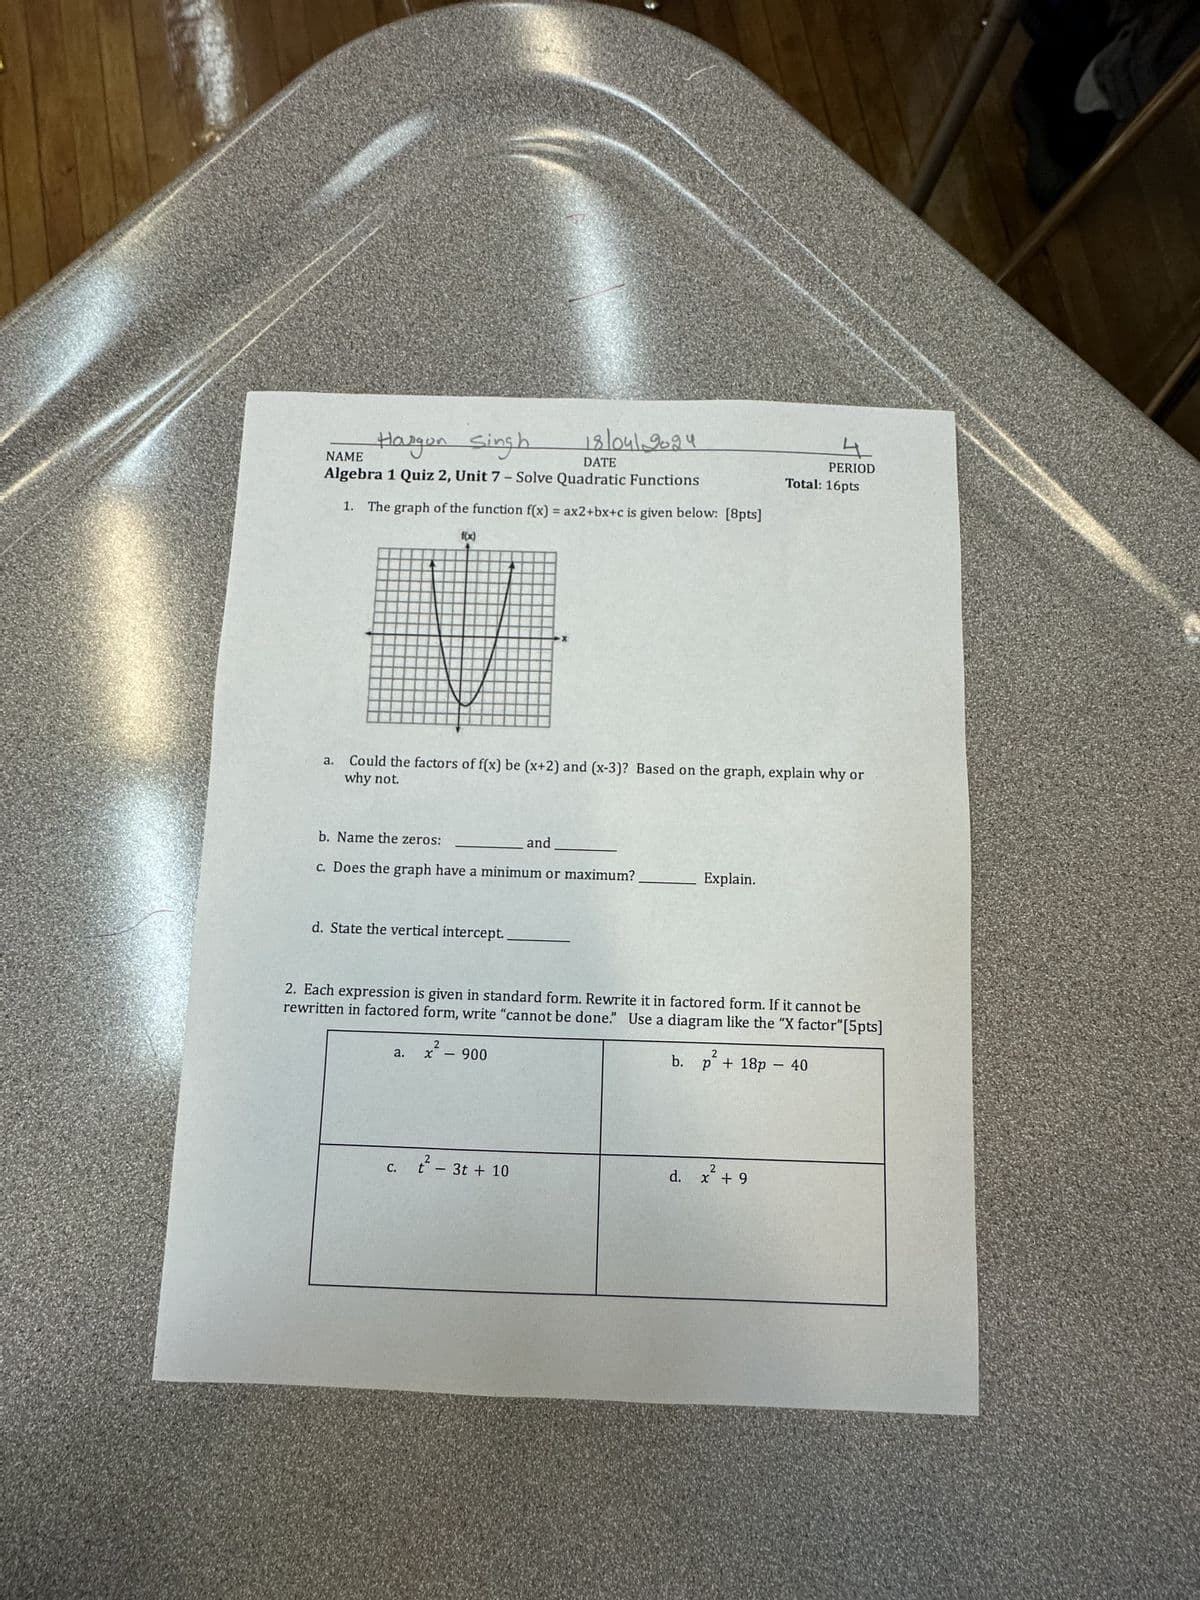 NAME
Hargon Singh
18/04/2024
DATE
Algebra 1 Quiz 2, Unit 7 - Solve Quadratic Functions
1. The graph of the function f(x) = ax2+bx+c is given below: [8pts]
a.
f(x)
4
PERIOD
Total: 16pts
why not.
Could the factors of f(x) be (x+2) and (x-3)? Based on the graph, explain why or
b. Name the zeros:
and
c. Does the graph have a minimum or maximum?
d. State the vertical intercept.
Explain.
2. Each expression is given in standard form. Rewrite it in factored form. If it cannot be
rewritten in factored form, write "cannot be done." Use a diagram like the "X factor" [5pts]
2
a.
x
900
b.
p + 18p - 40
c. t² - 3t+ 10
d. x + 9